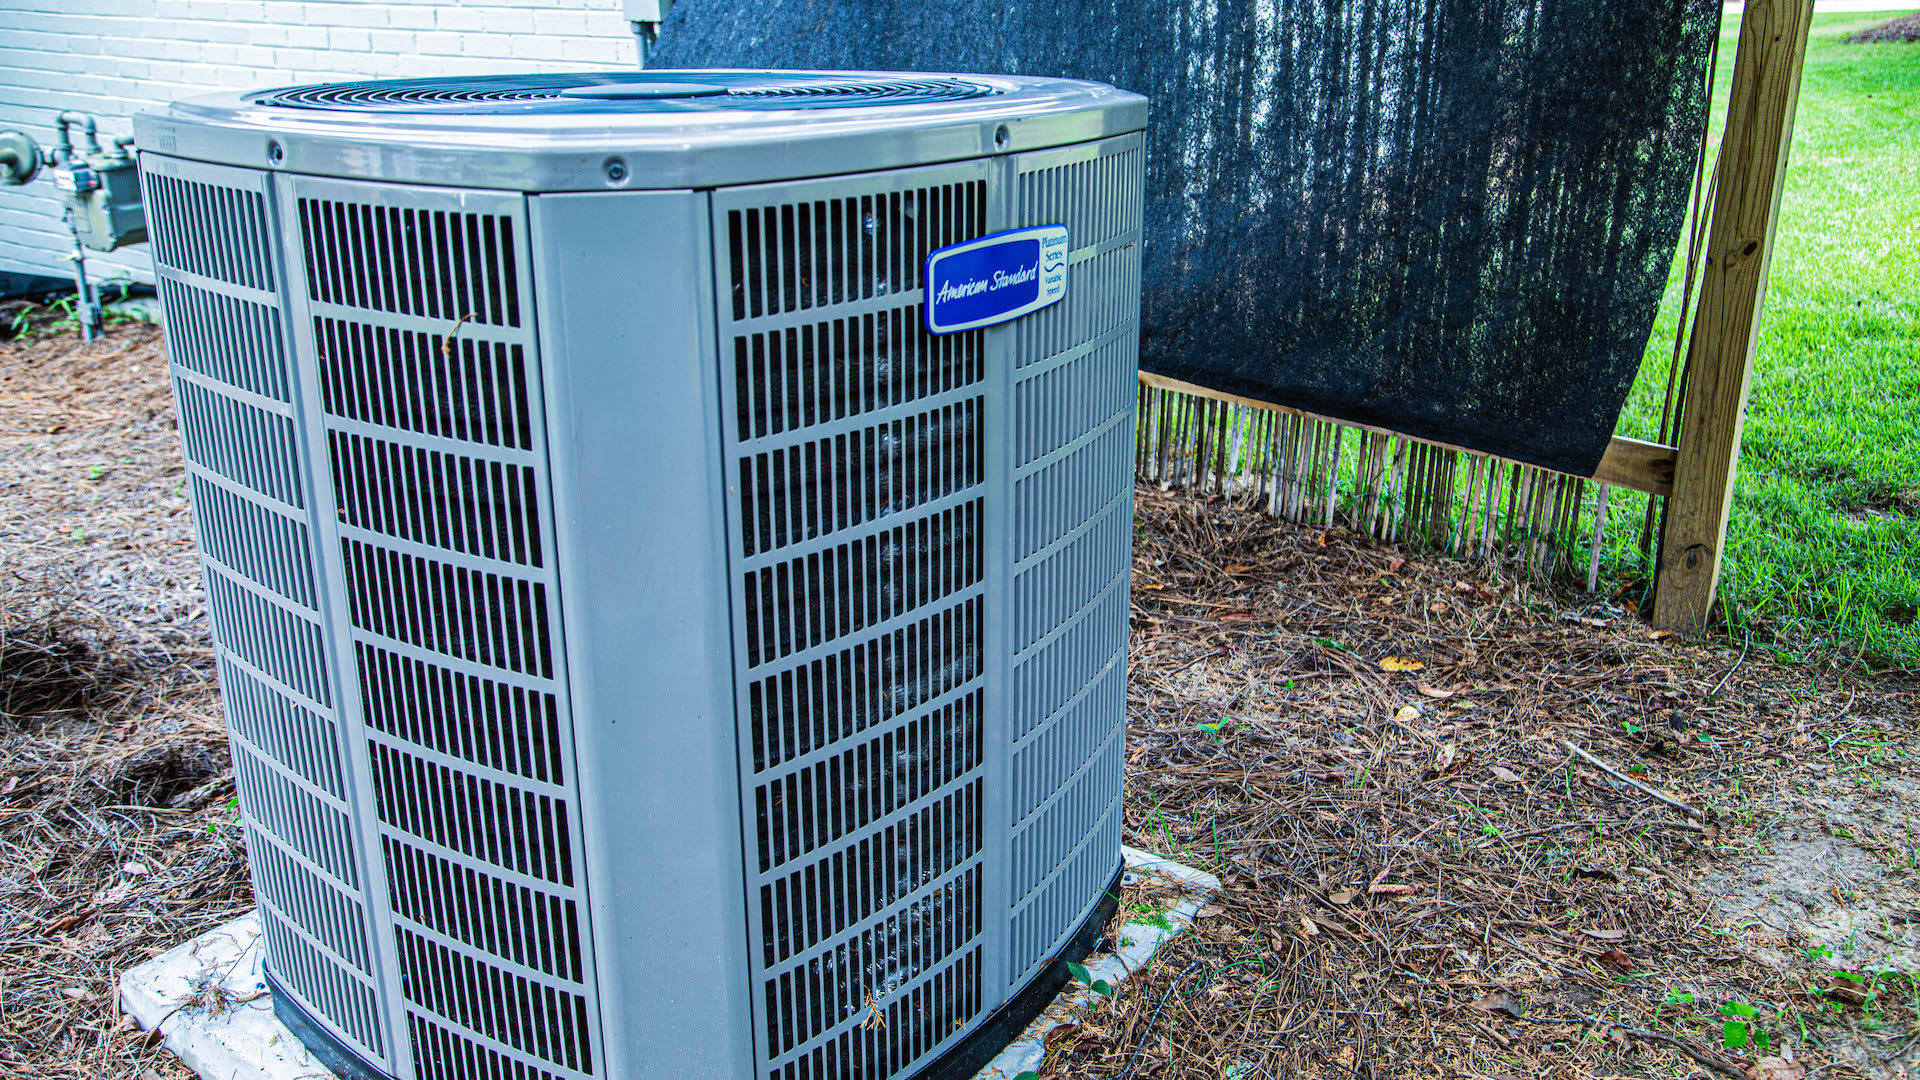 Home Air Conditioner: Repair or Replace? - Today's Homeowner